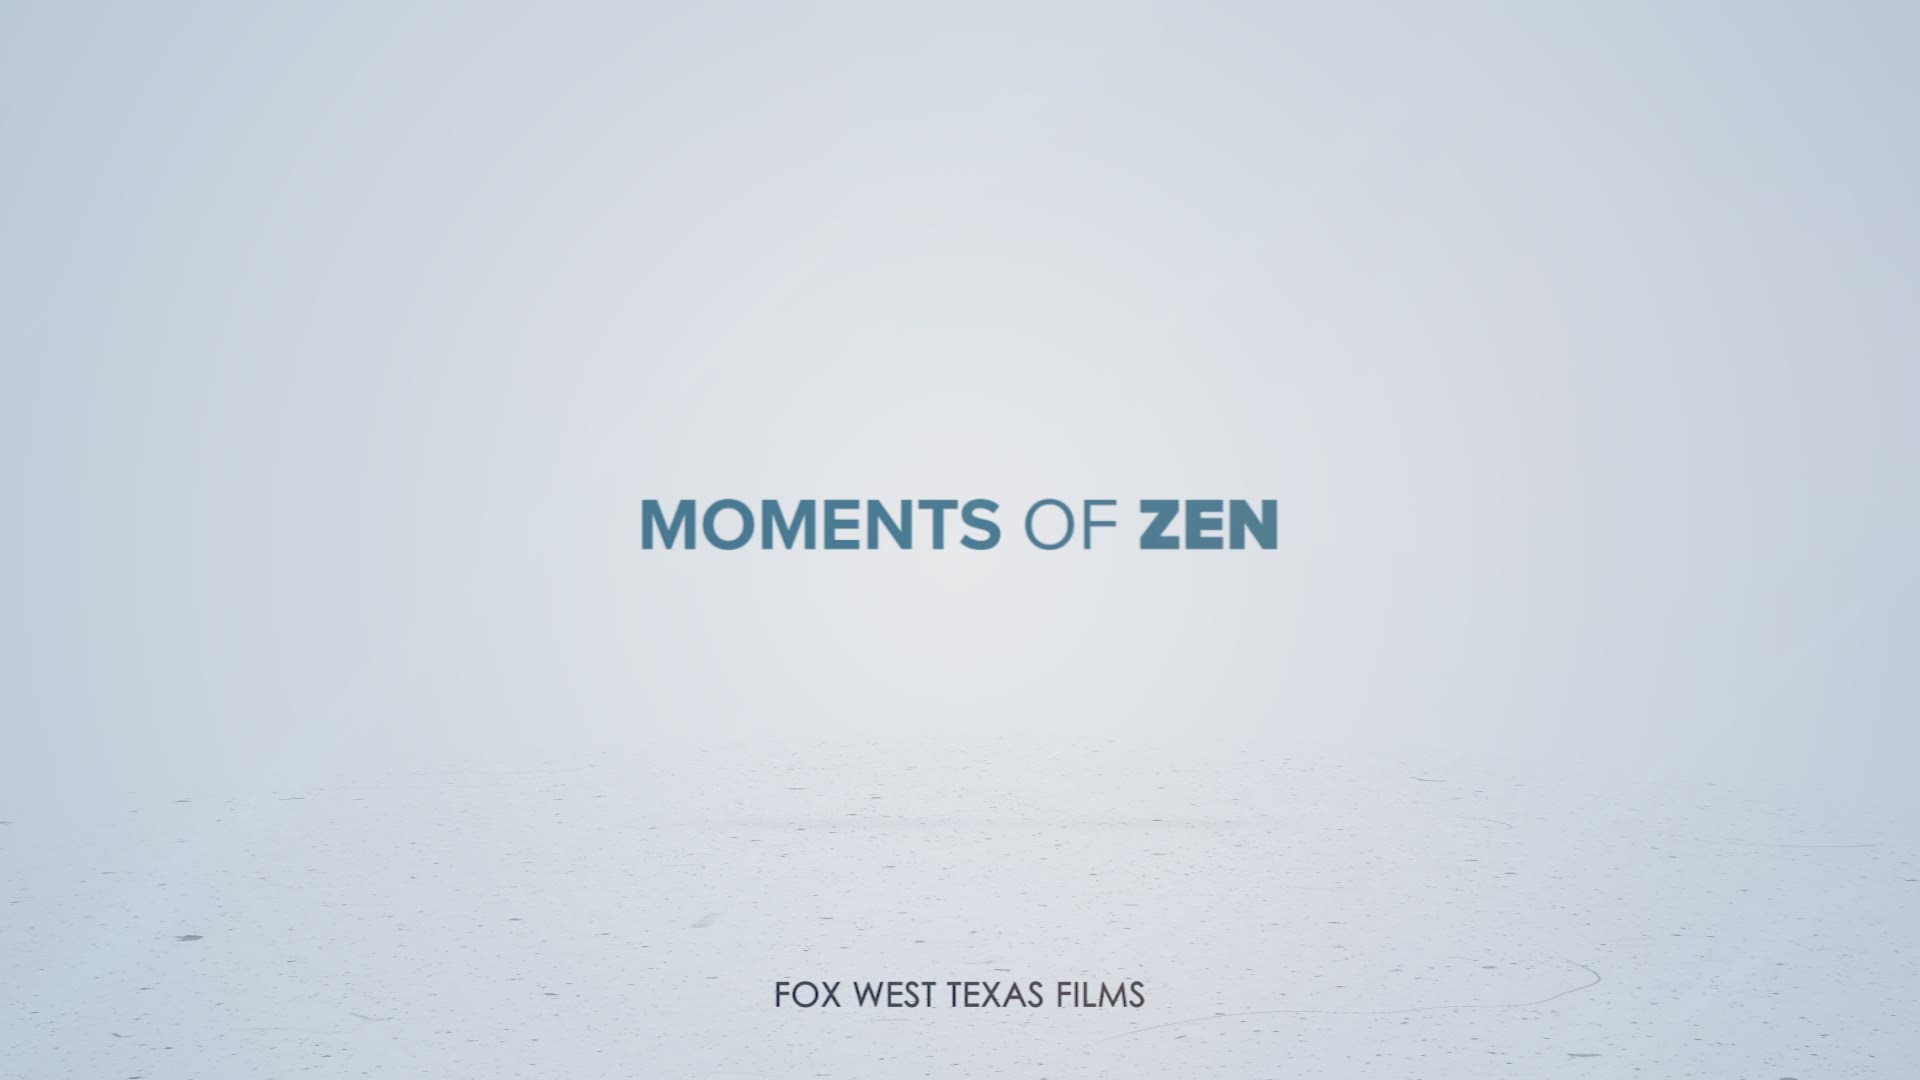 A two part series showcasing a Moment of Zen around Big Lake, Texas